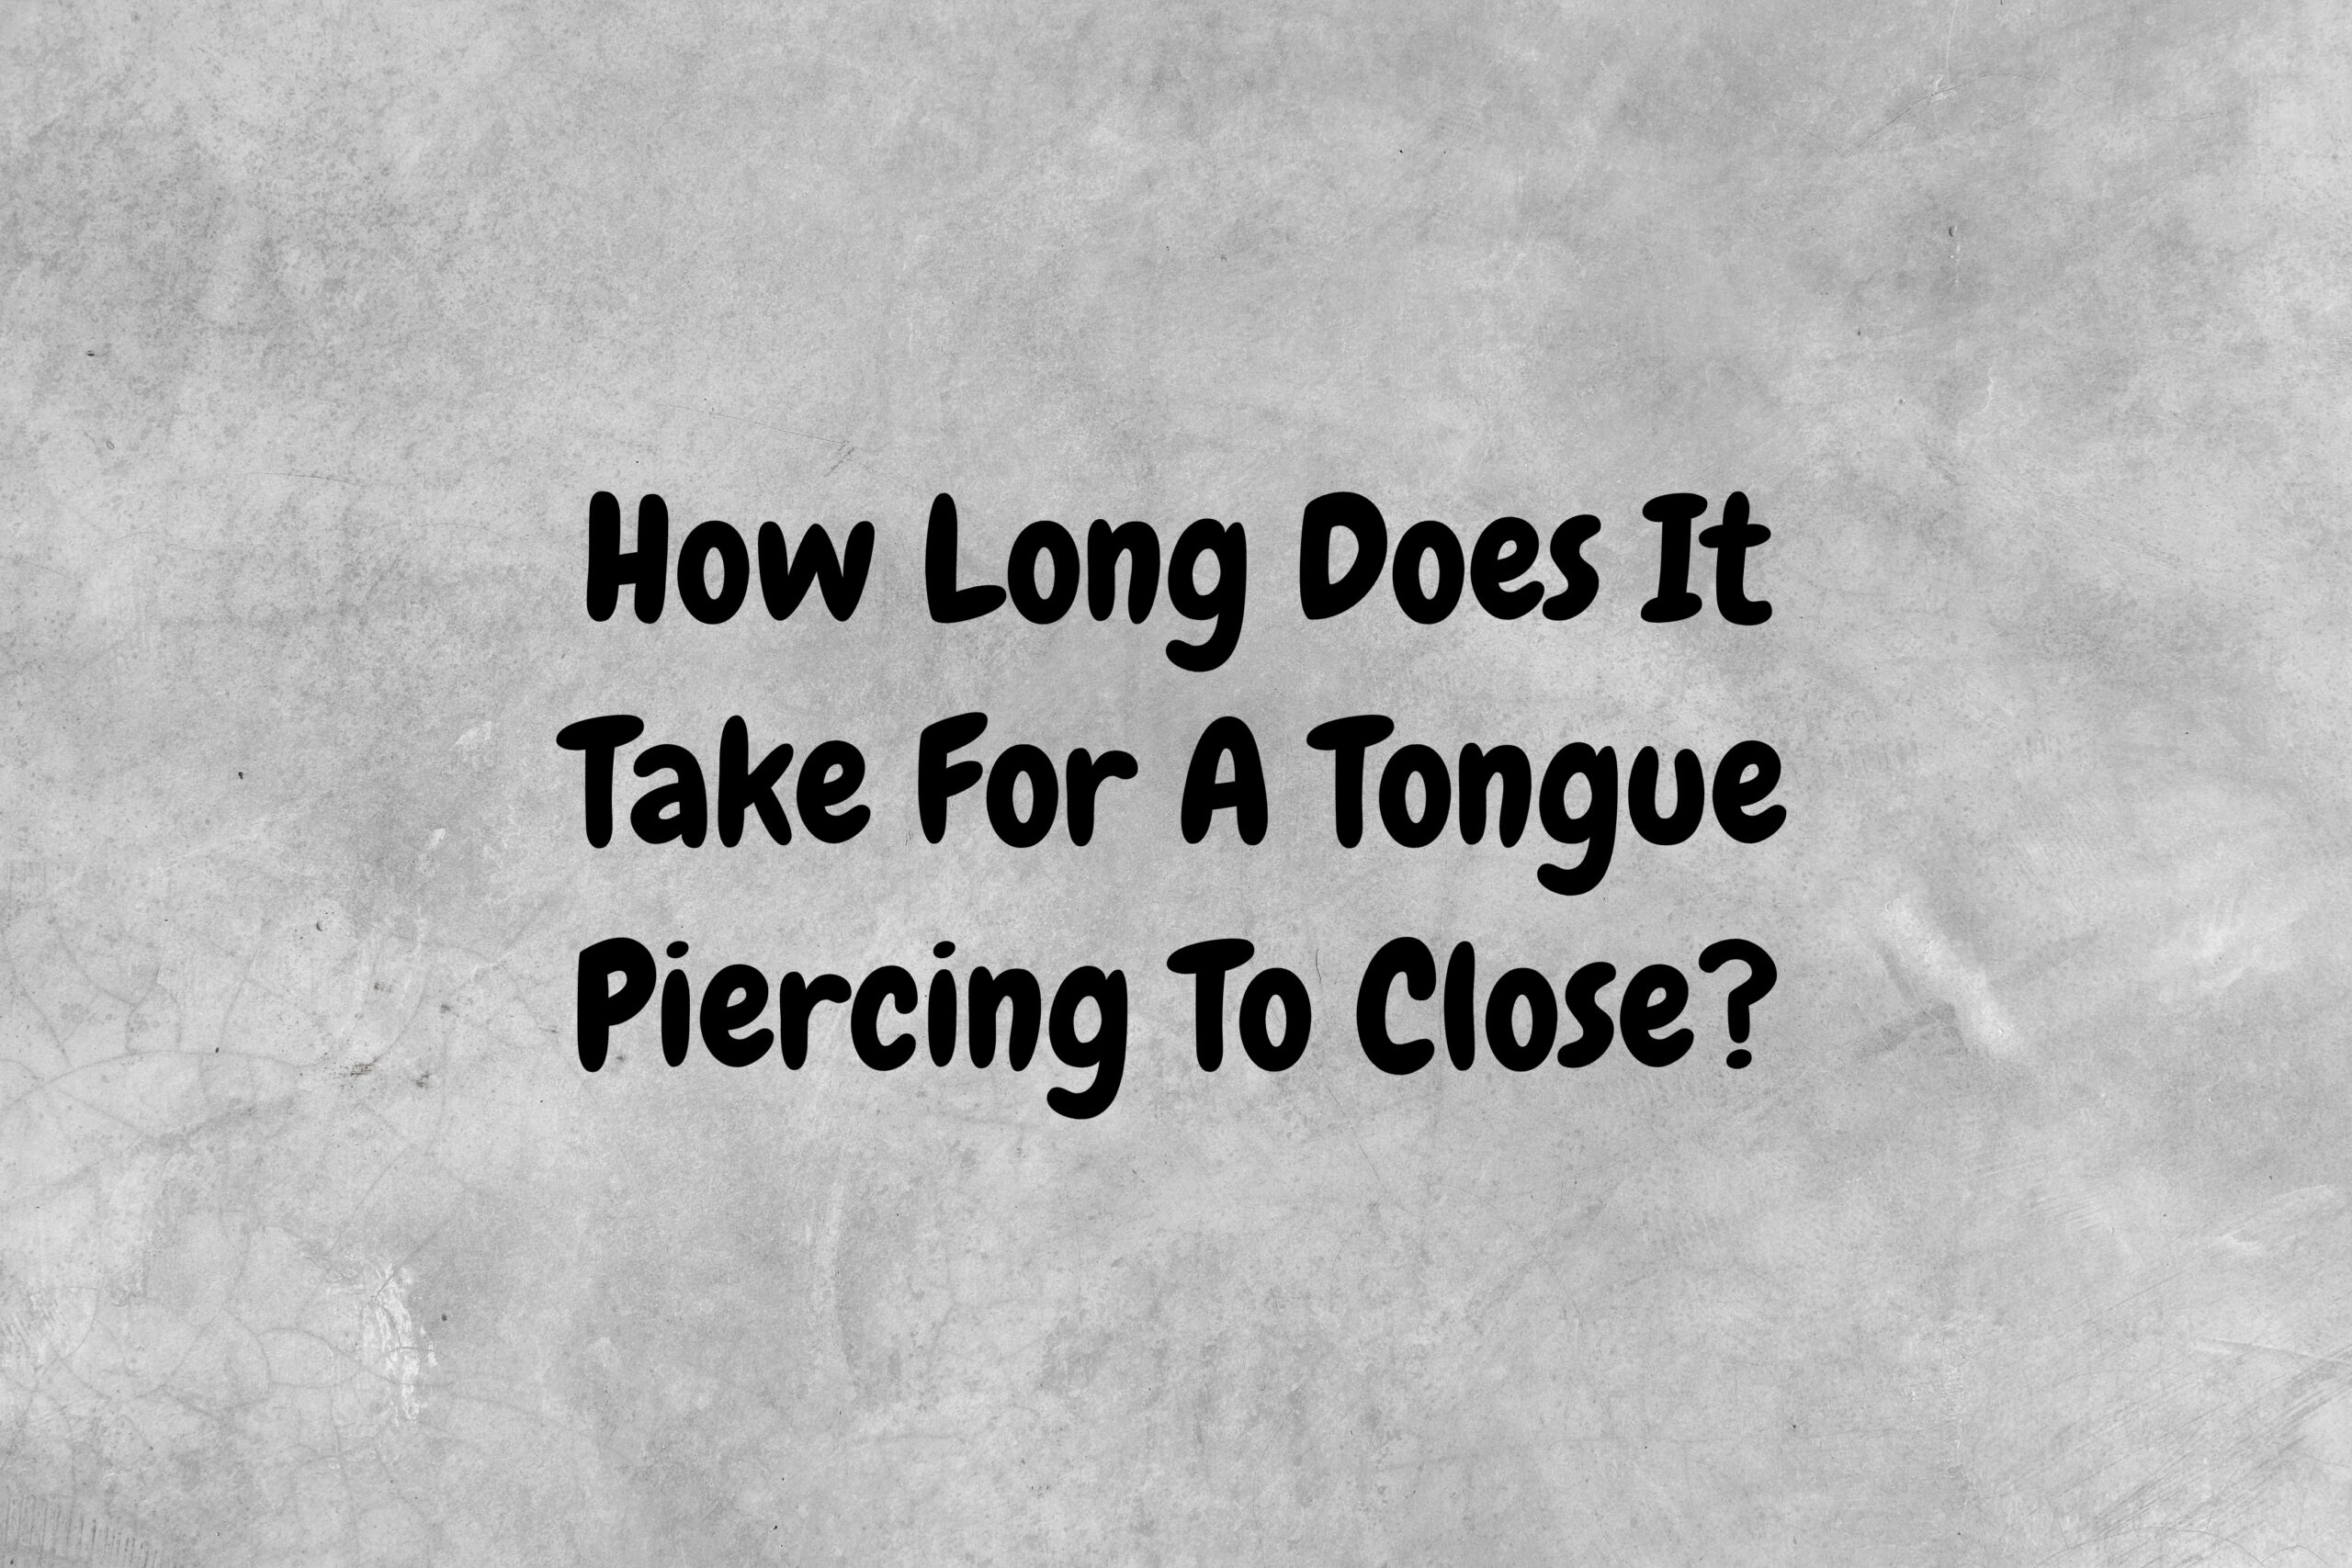 An image with a gray background and black text that asks the question, "How long does it take for a tongue piercing to close?"